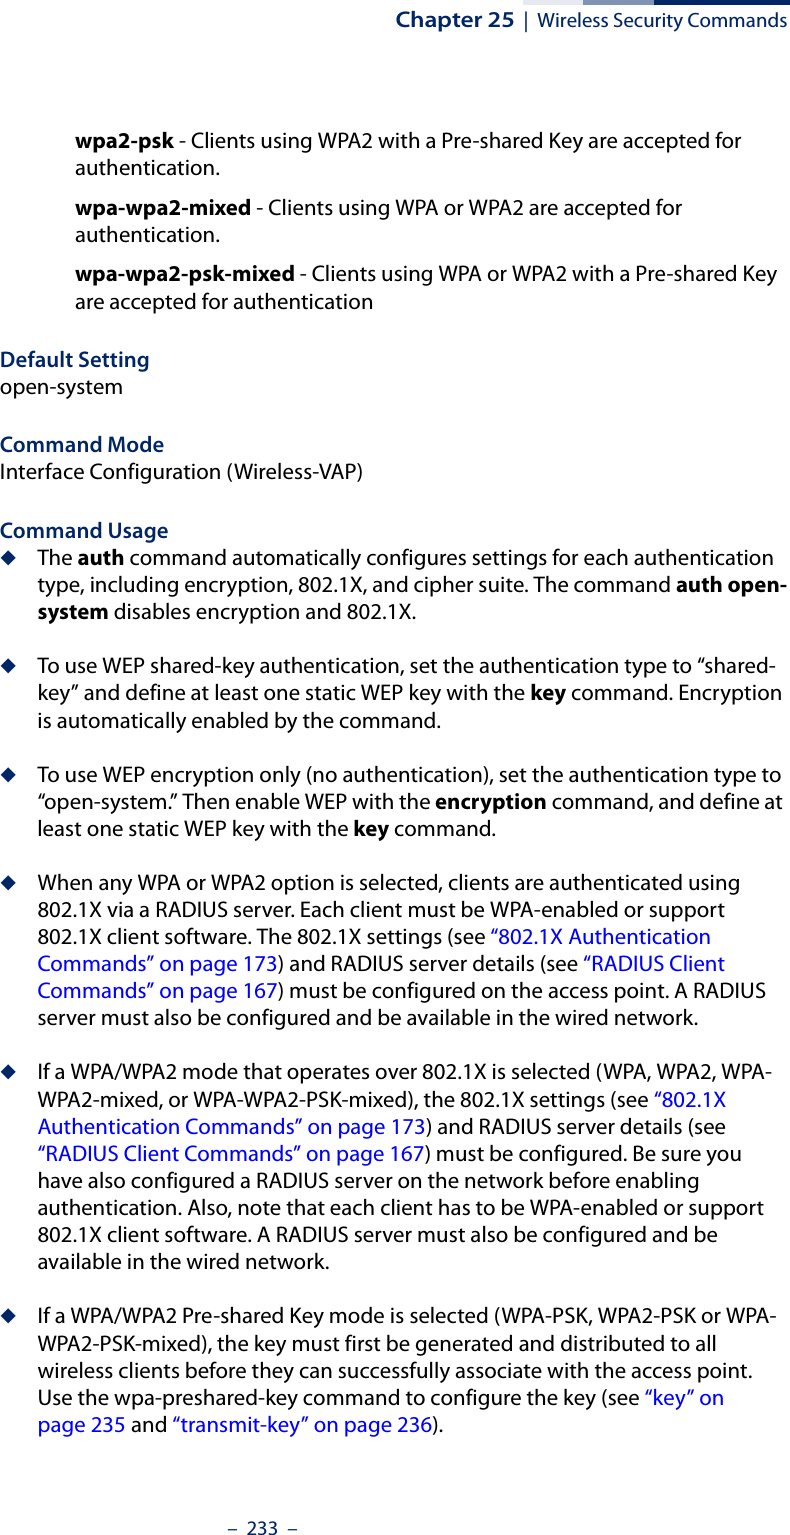 Chapter 25  |  Wireless Security Commands–  233  –wpa2-psk - Clients using WPA2 with a Pre-shared Key are accepted for authentication.wpa-wpa2-mixed - Clients using WPA or WPA2 are accepted for authentication.wpa-wpa2-psk-mixed - Clients using WPA or WPA2 with a Pre-shared Key are accepted for authenticationDefault Setting open-systemCommand Mode Interface Configuration (Wireless-VAP)Command Usage ◆The auth command automatically configures settings for each authentication type, including encryption, 802.1X, and cipher suite. The command auth open-system disables encryption and 802.1X.◆To use WEP shared-key authentication, set the authentication type to “shared-key” and define at least one static WEP key with the key command. Encryption is automatically enabled by the command.◆To use WEP encryption only (no authentication), set the authentication type to “open-system.” Then enable WEP with the encryption command, and define at least one static WEP key with the key command.◆When any WPA or WPA2 option is selected, clients are authenticated using 802.1X via a RADIUS server. Each client must be WPA-enabled or support 802.1X client software. The 802.1X settings (see “802.1X Authentication Commands” on page 173) and RADIUS server details (see “RADIUS Client Commands” on page 167) must be configured on the access point. A RADIUS server must also be configured and be available in the wired network.◆If a WPA/WPA2 mode that operates over 802.1X is selected (WPA, WPA2, WPA-WPA2-mixed, or WPA-WPA2-PSK-mixed), the 802.1X settings (see “802.1X Authentication Commands” on page 173) and RADIUS server details (see “RADIUS Client Commands” on page 167) must be configured. Be sure you have also configured a RADIUS server on the network before enabling authentication. Also, note that each client has to be WPA-enabled or support 802.1X client software. A RADIUS server must also be configured and be available in the wired network.◆If a WPA/WPA2 Pre-shared Key mode is selected (WPA-PSK, WPA2-PSK or WPA-WPA2-PSK-mixed), the key must first be generated and distributed to all wireless clients before they can successfully associate with the access point. Use the wpa-preshared-key command to configure the key (see “key” on page 235 and “transmit-key” on page 236).  